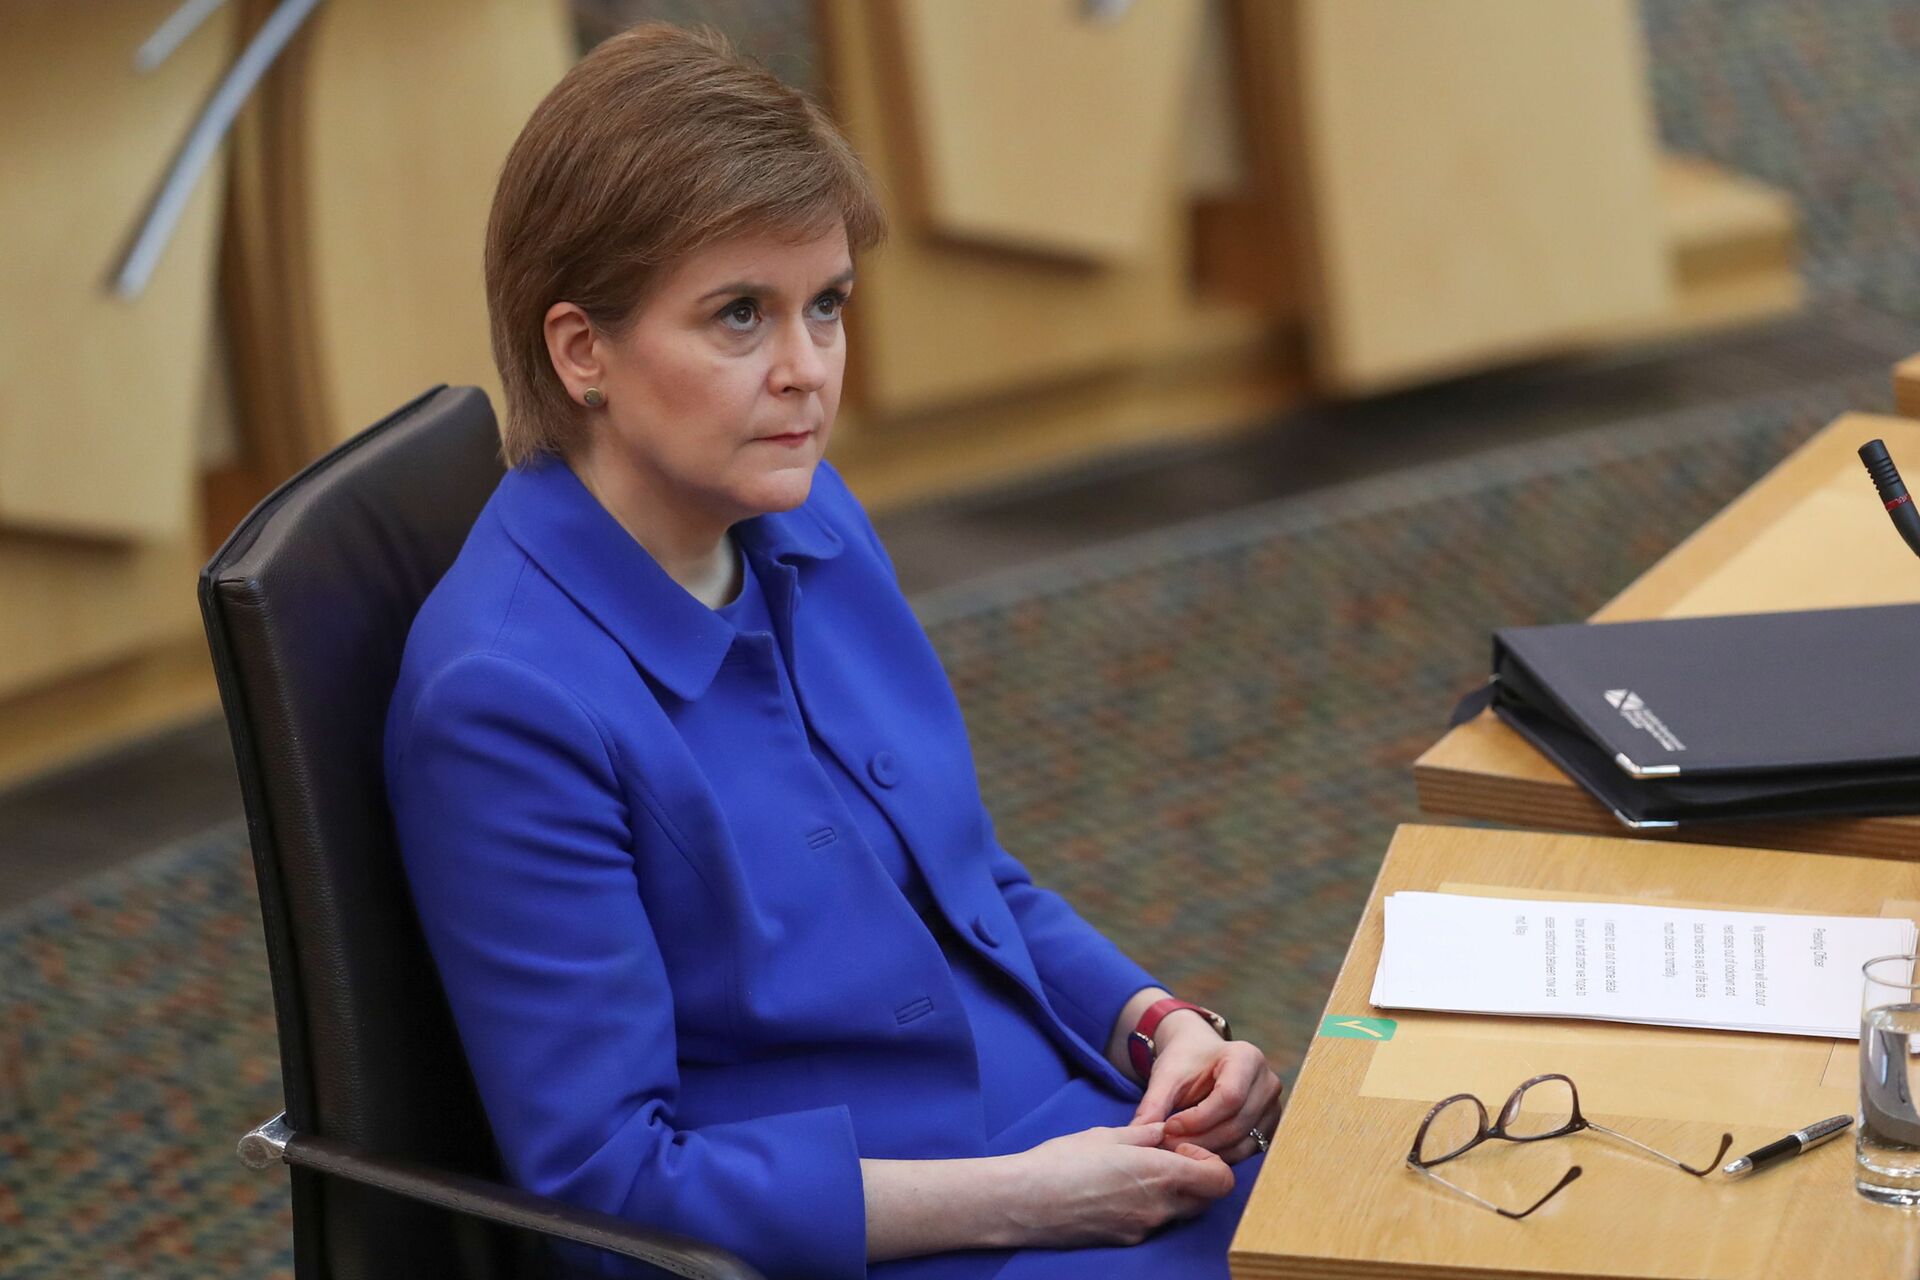 Labour Leaders Urge Nicola Sturgeon to Resign if She's Found to Have Broken Ministerial Code - Sputnik International, 1920, 19.03.2021